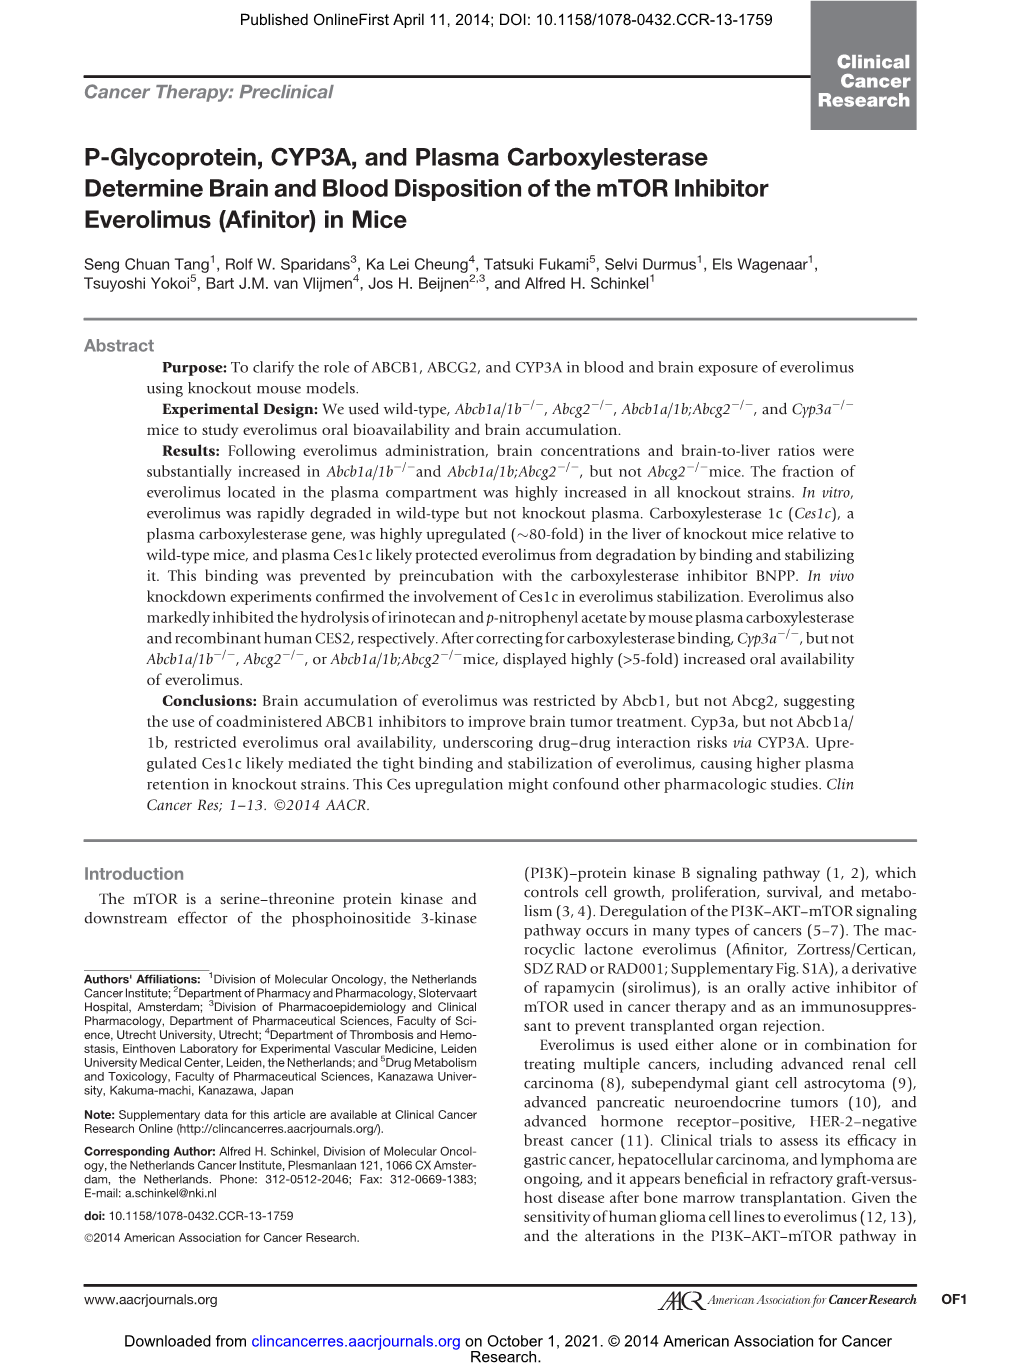 P-Glycoprotein, CYP3A, and Plasma Carboxylesterase Determine Brain and Blood Disposition of the Mtor Inhibitor Everolimus (Aﬁnitor) in Mice